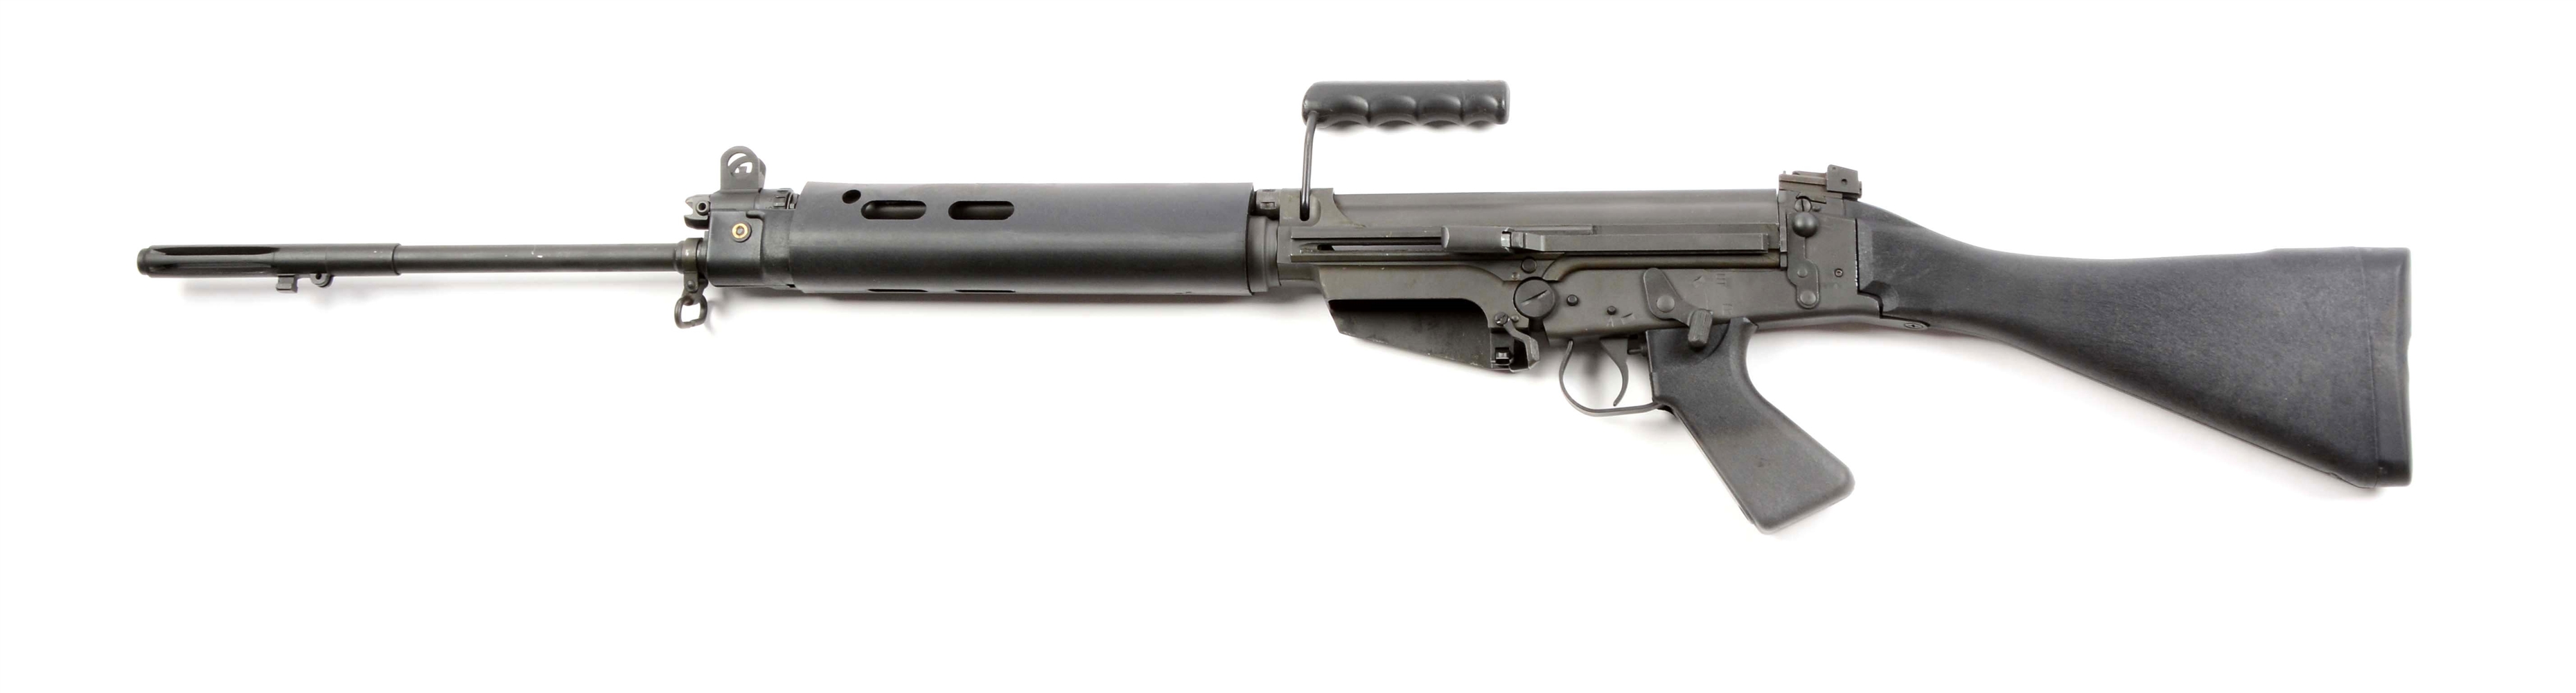 Century Arms L1a1 Serial Numbers